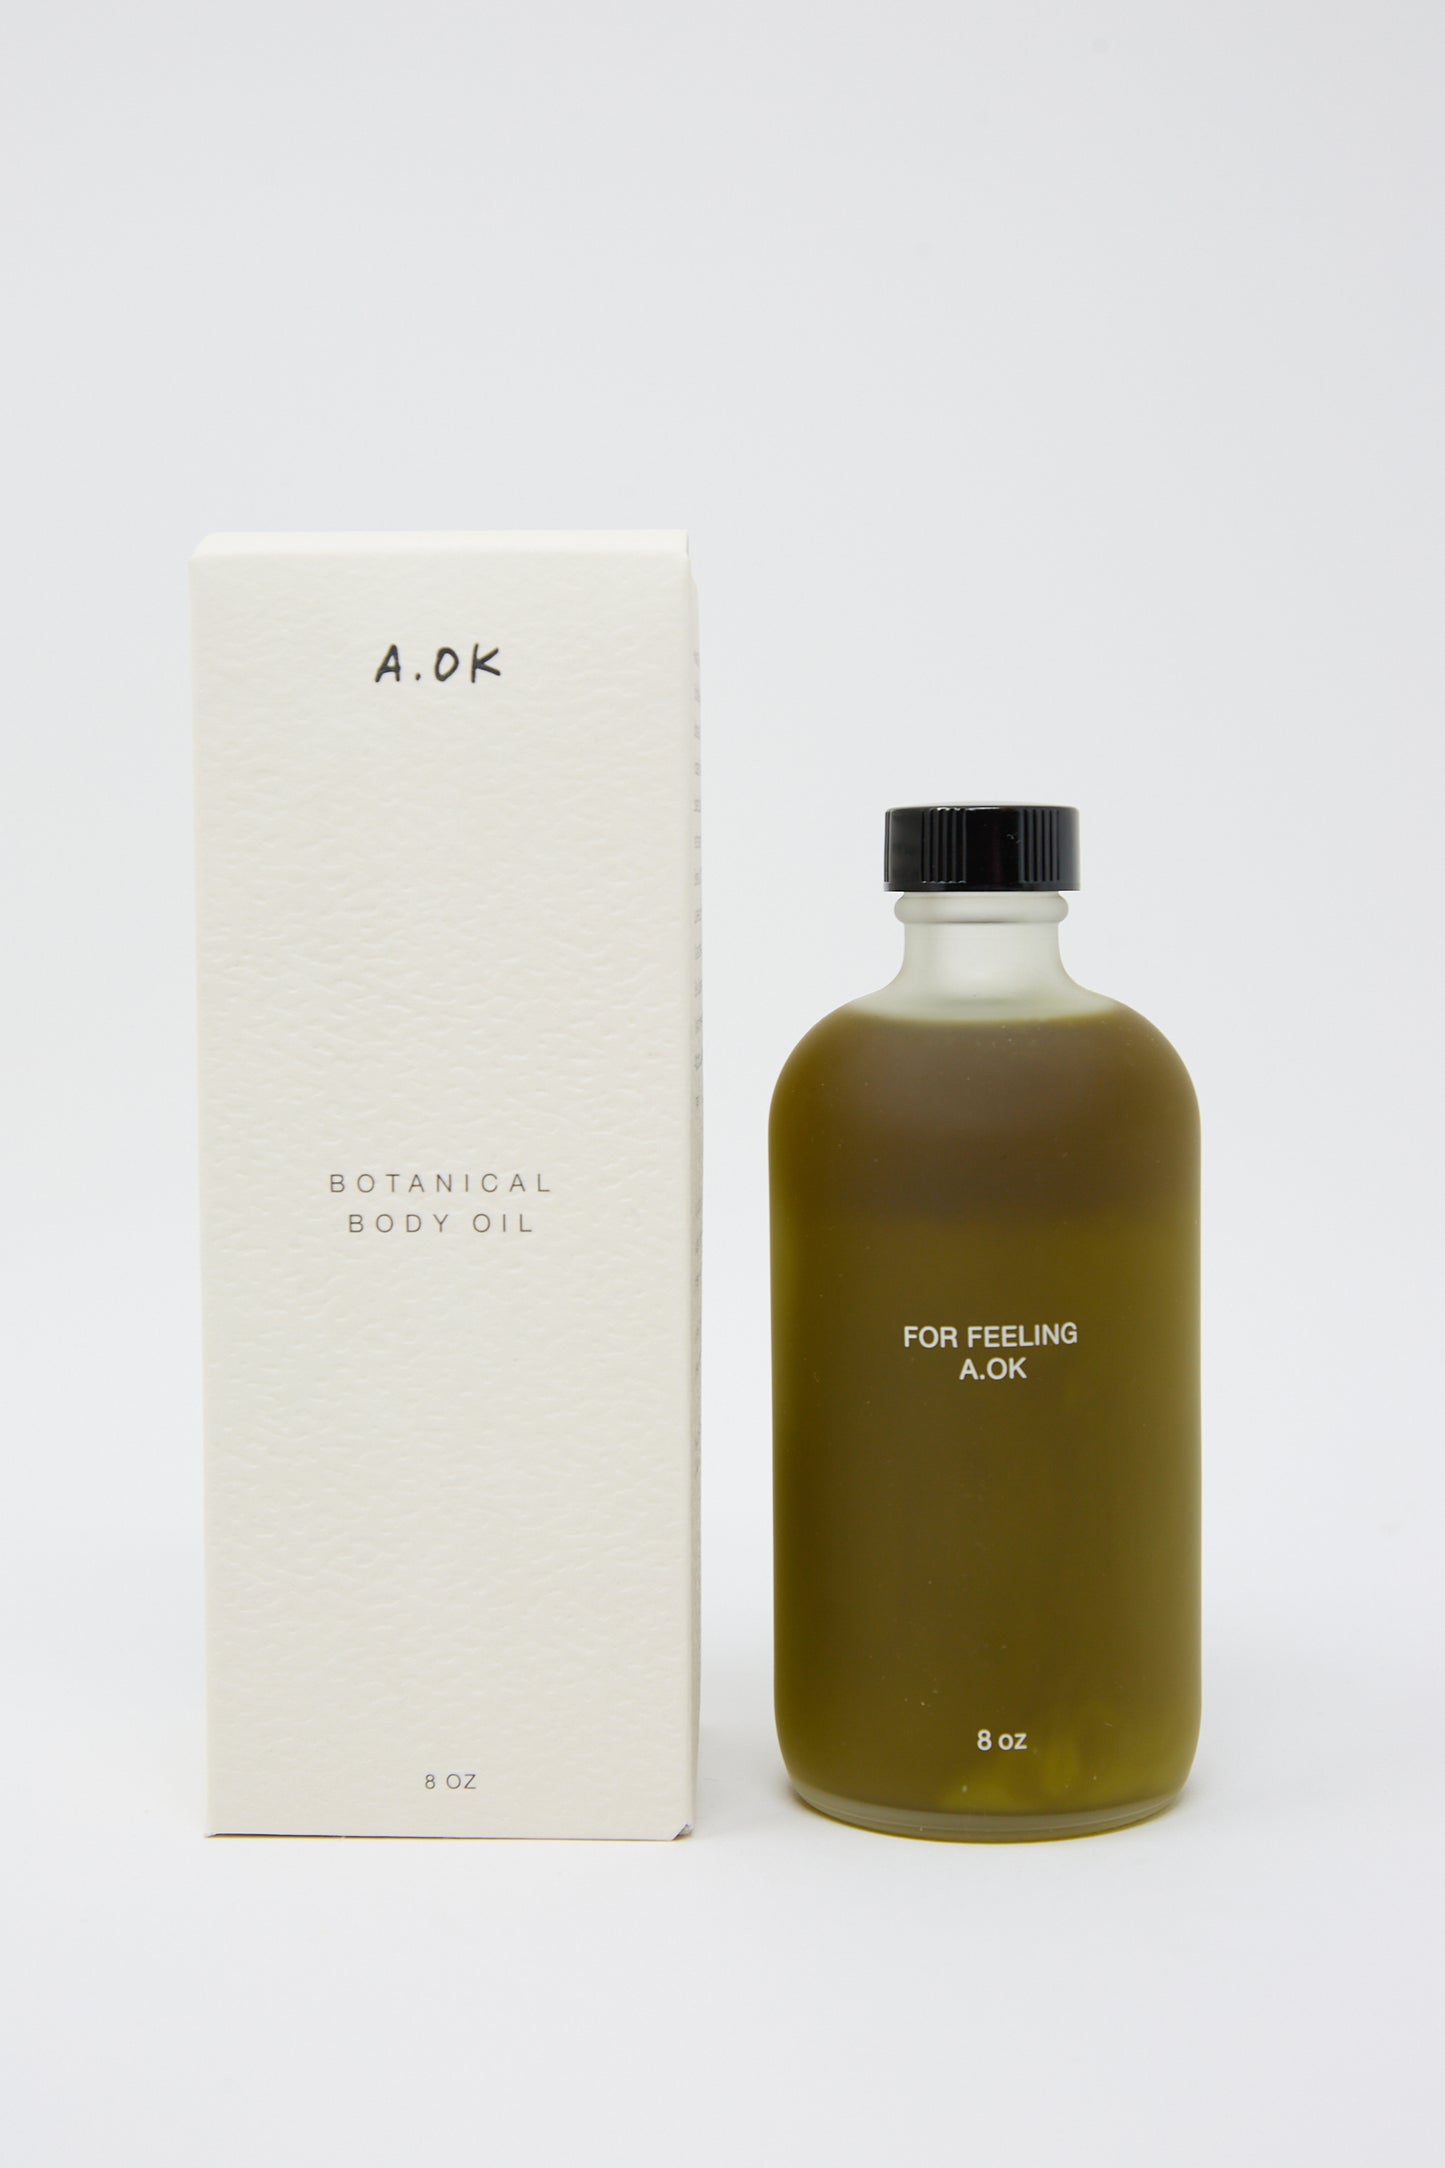 A bottle of A.OK Botanical Body Oil, 8 oz, with its unisex aroma, is shown next to its white packaging box.